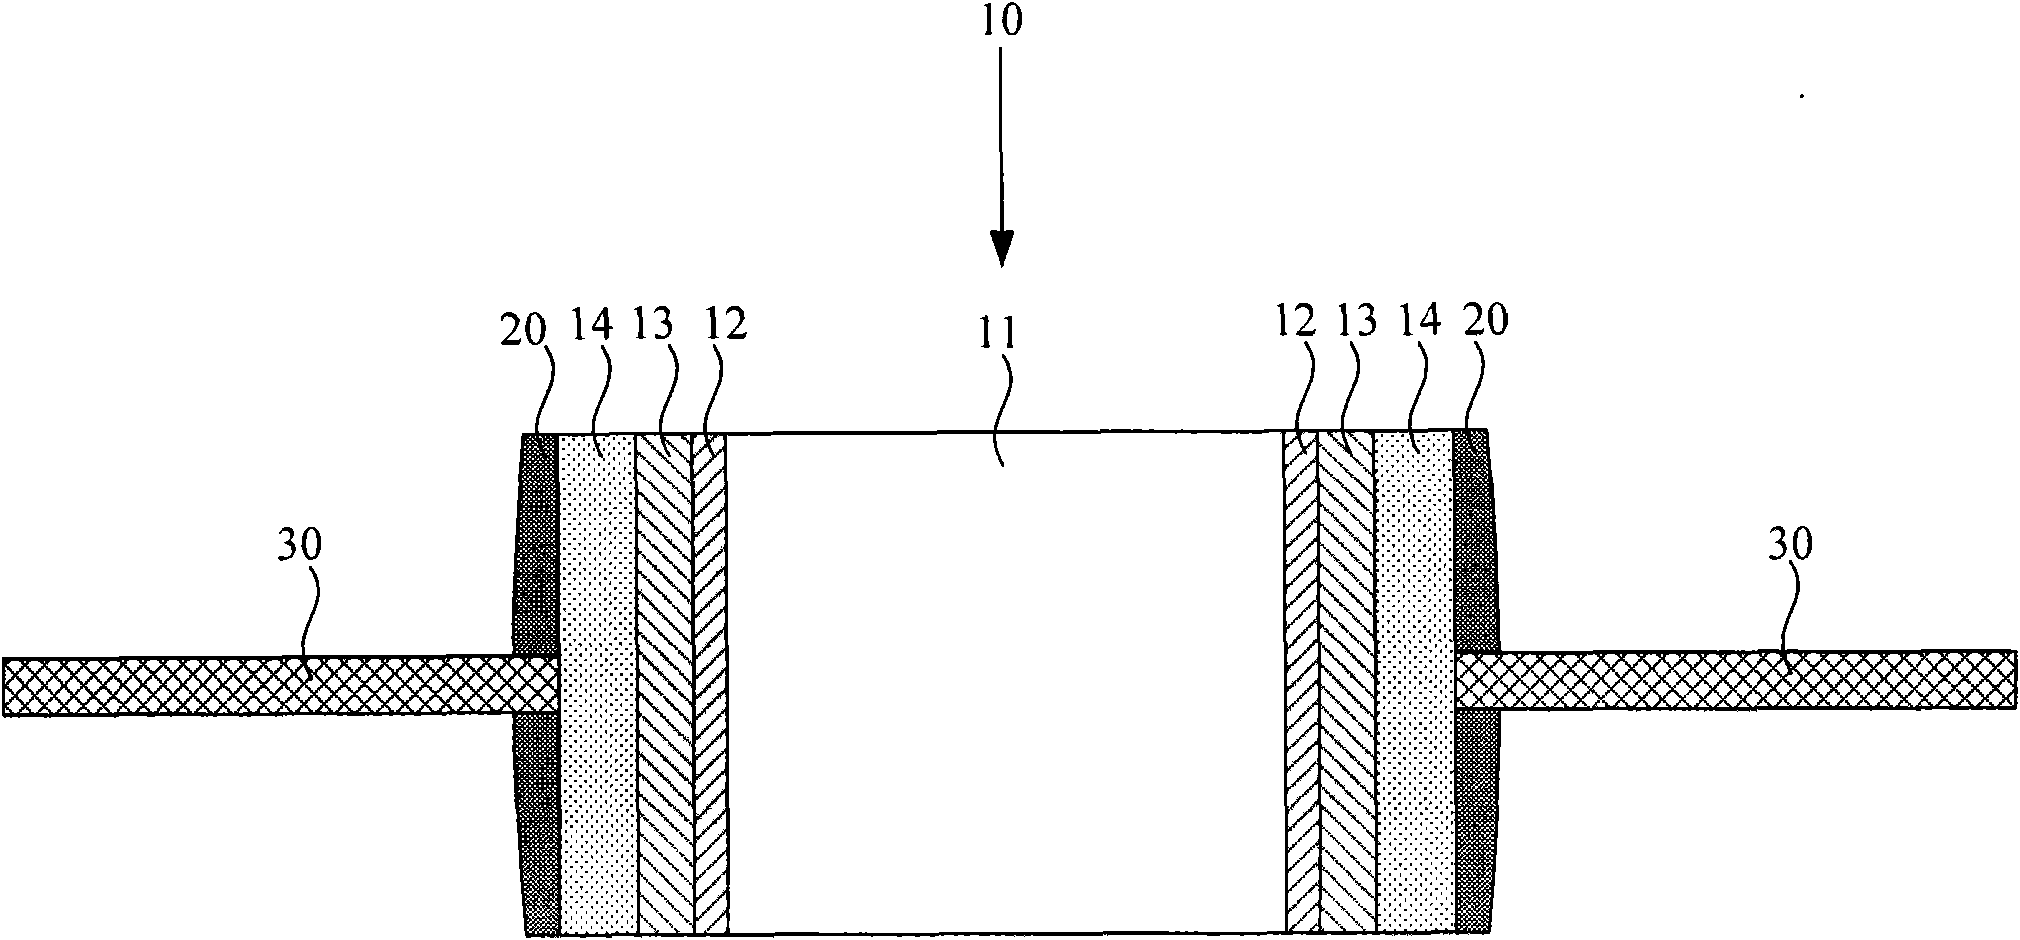 Method for detecting adhesive force of metal layer on back of wafer